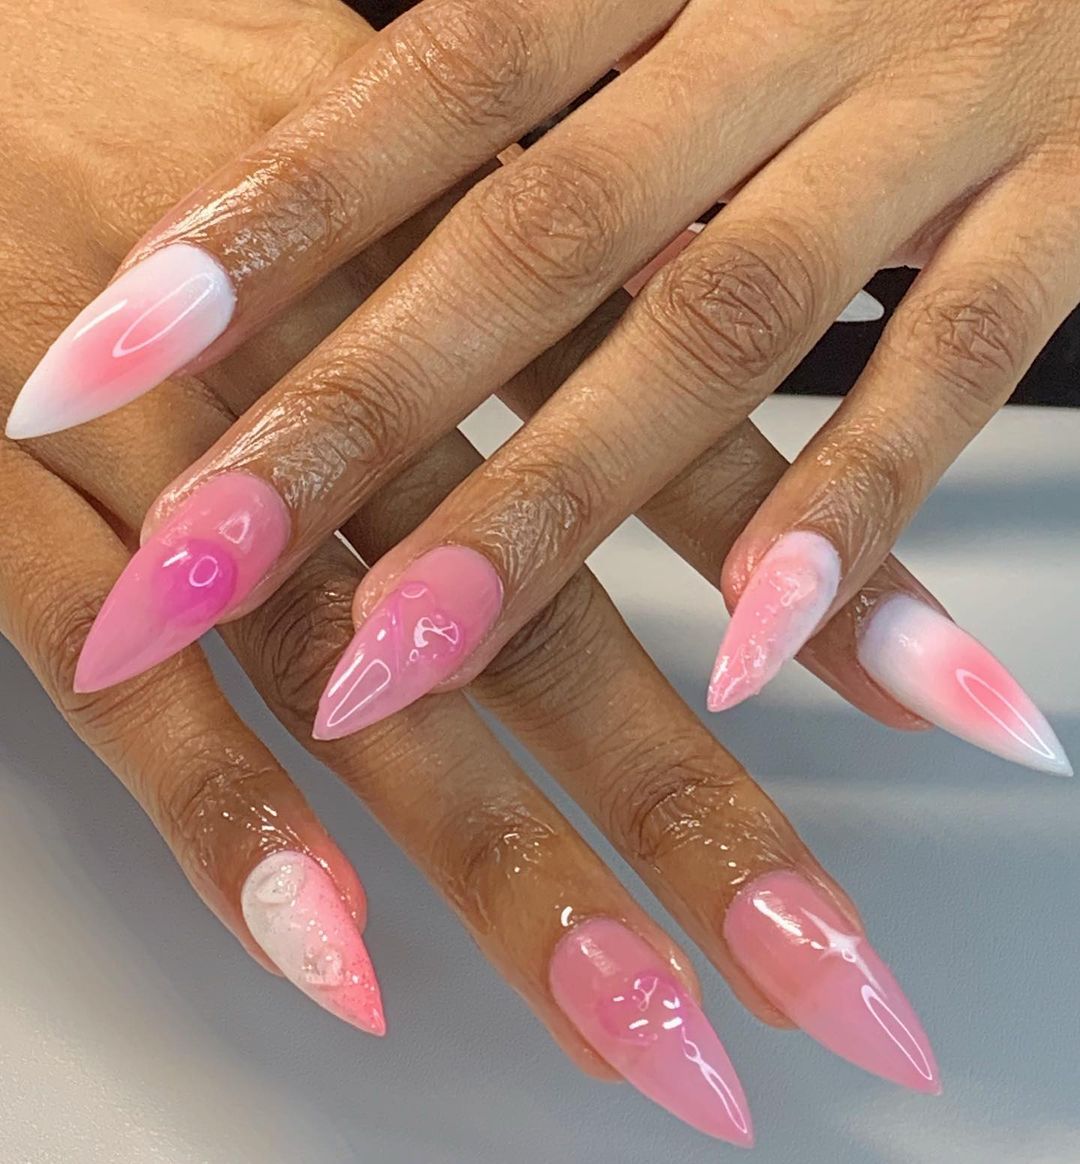 30 Pretty Gel X Nails You’ll Want to Try